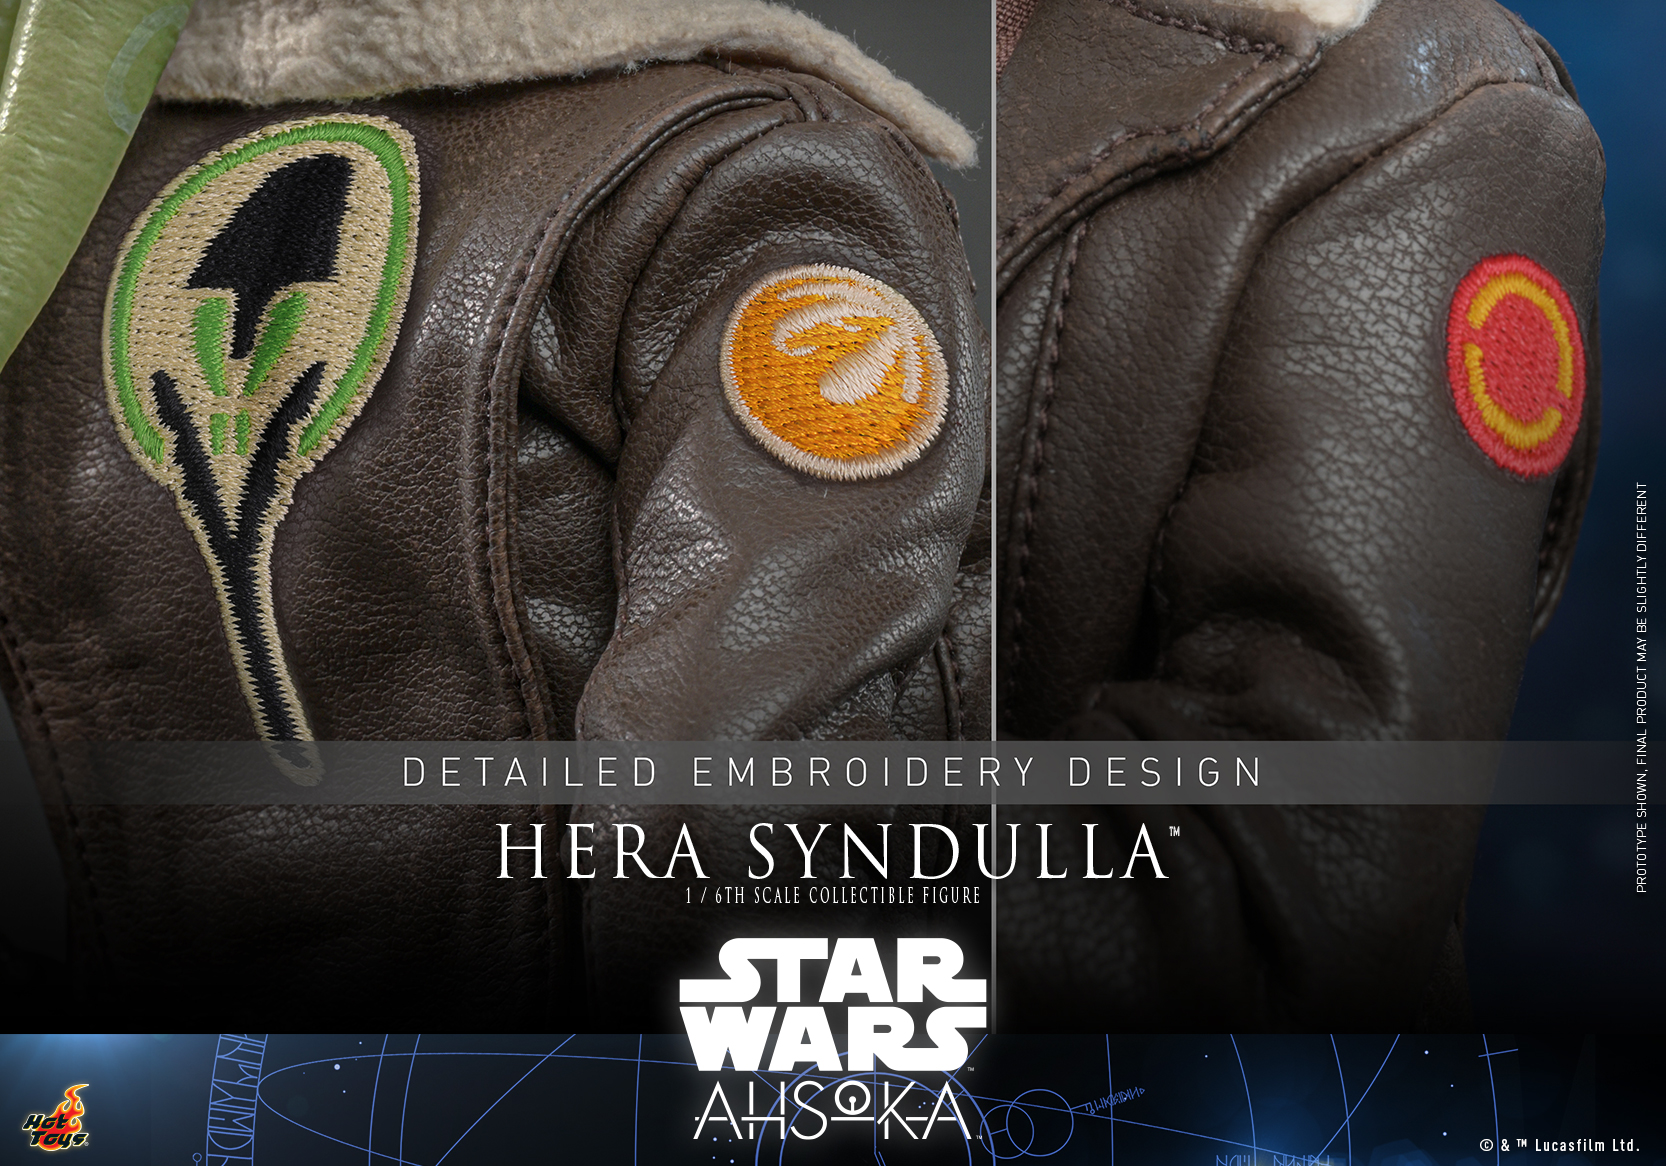 HOT TOYS Hera Syndulla Sixth Scale Figures